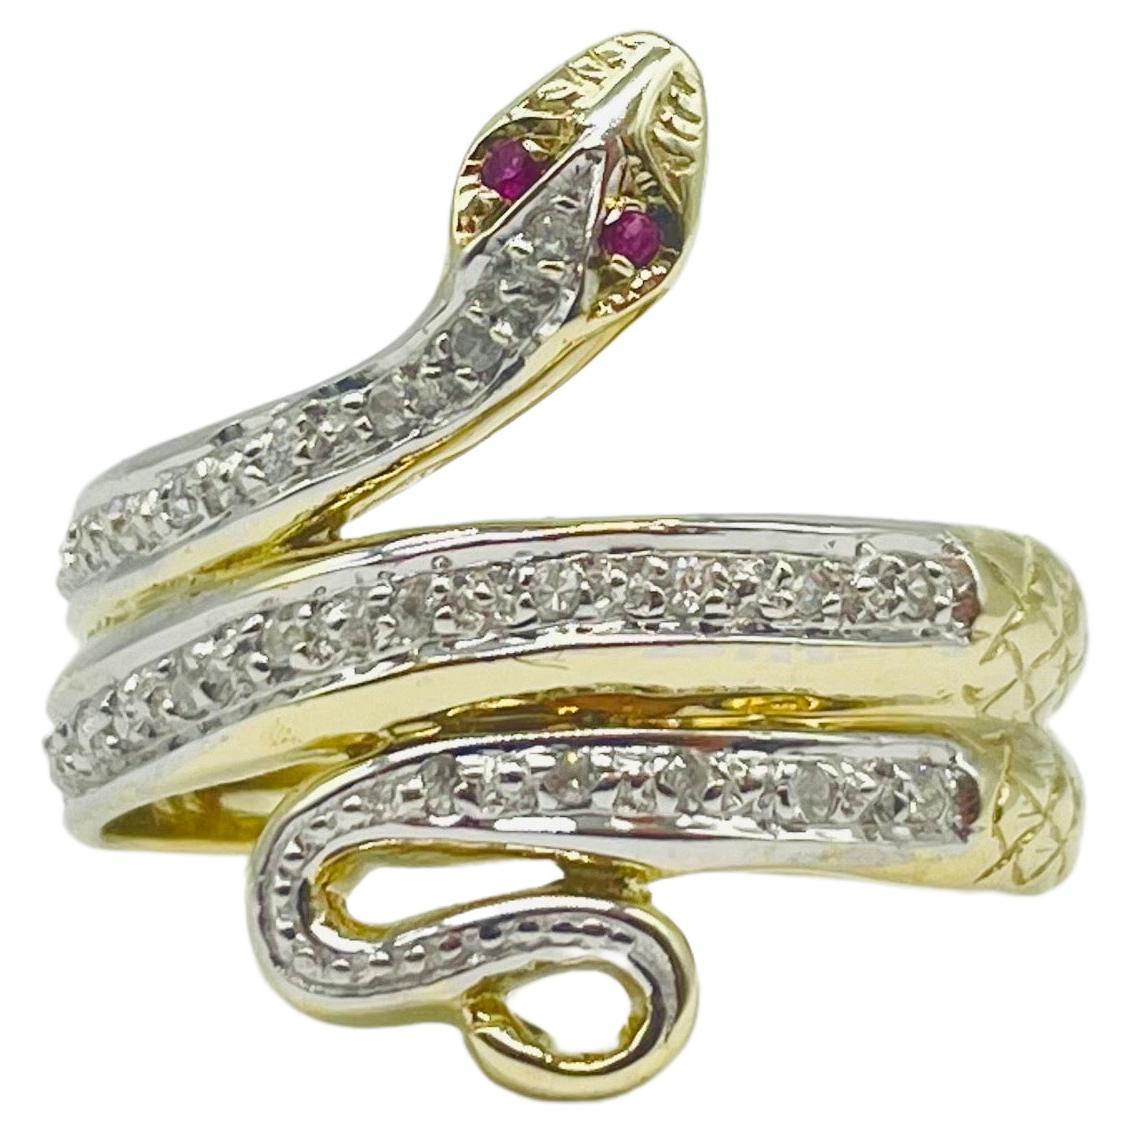 Art deco snake ring with diamonds and ruby yellowgold 